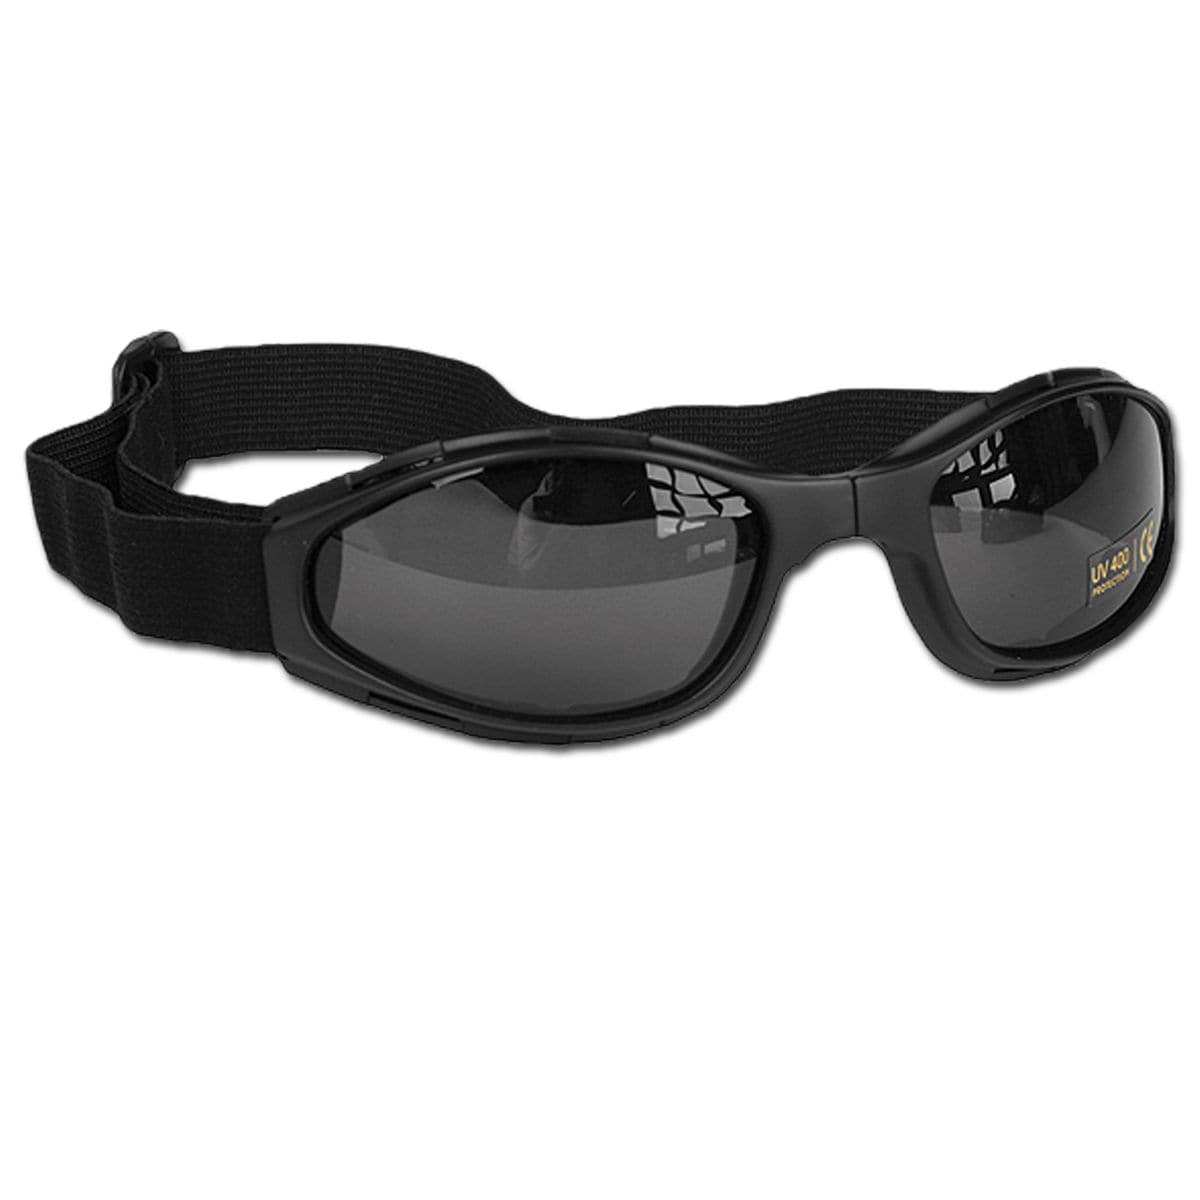 Purchase The Mil Tec Folding Safety Glasses Black By Asmc